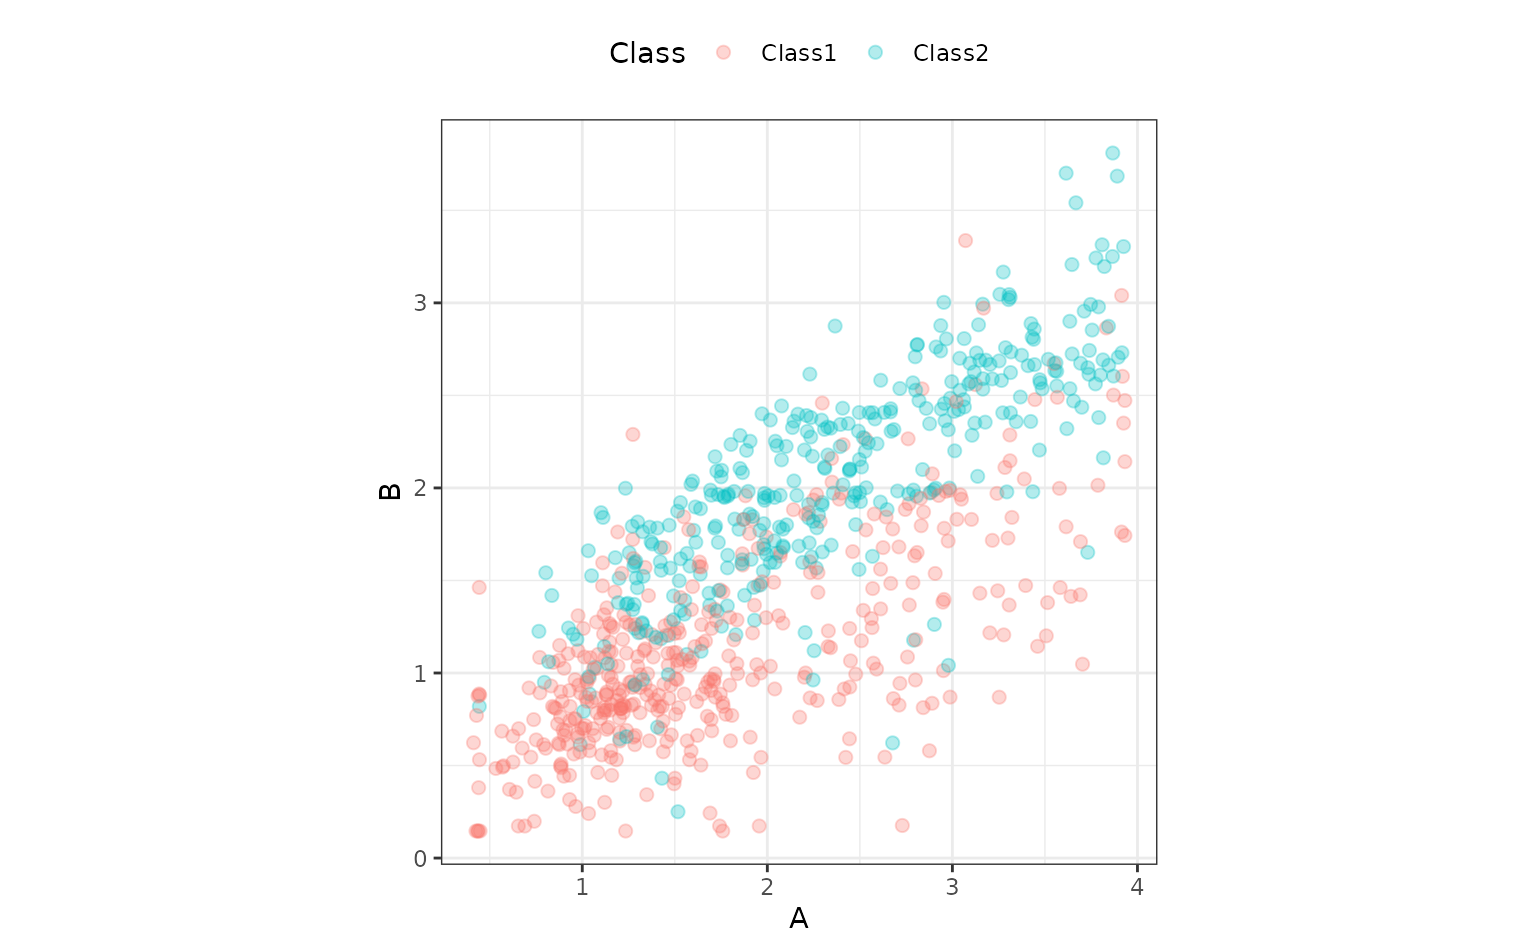 Scatter chart. A along the x-axis, B along the y-axis. Two classes class1 and class2 are colors red and blue respectively. data is linear-ish separation with class2 having higher B values.